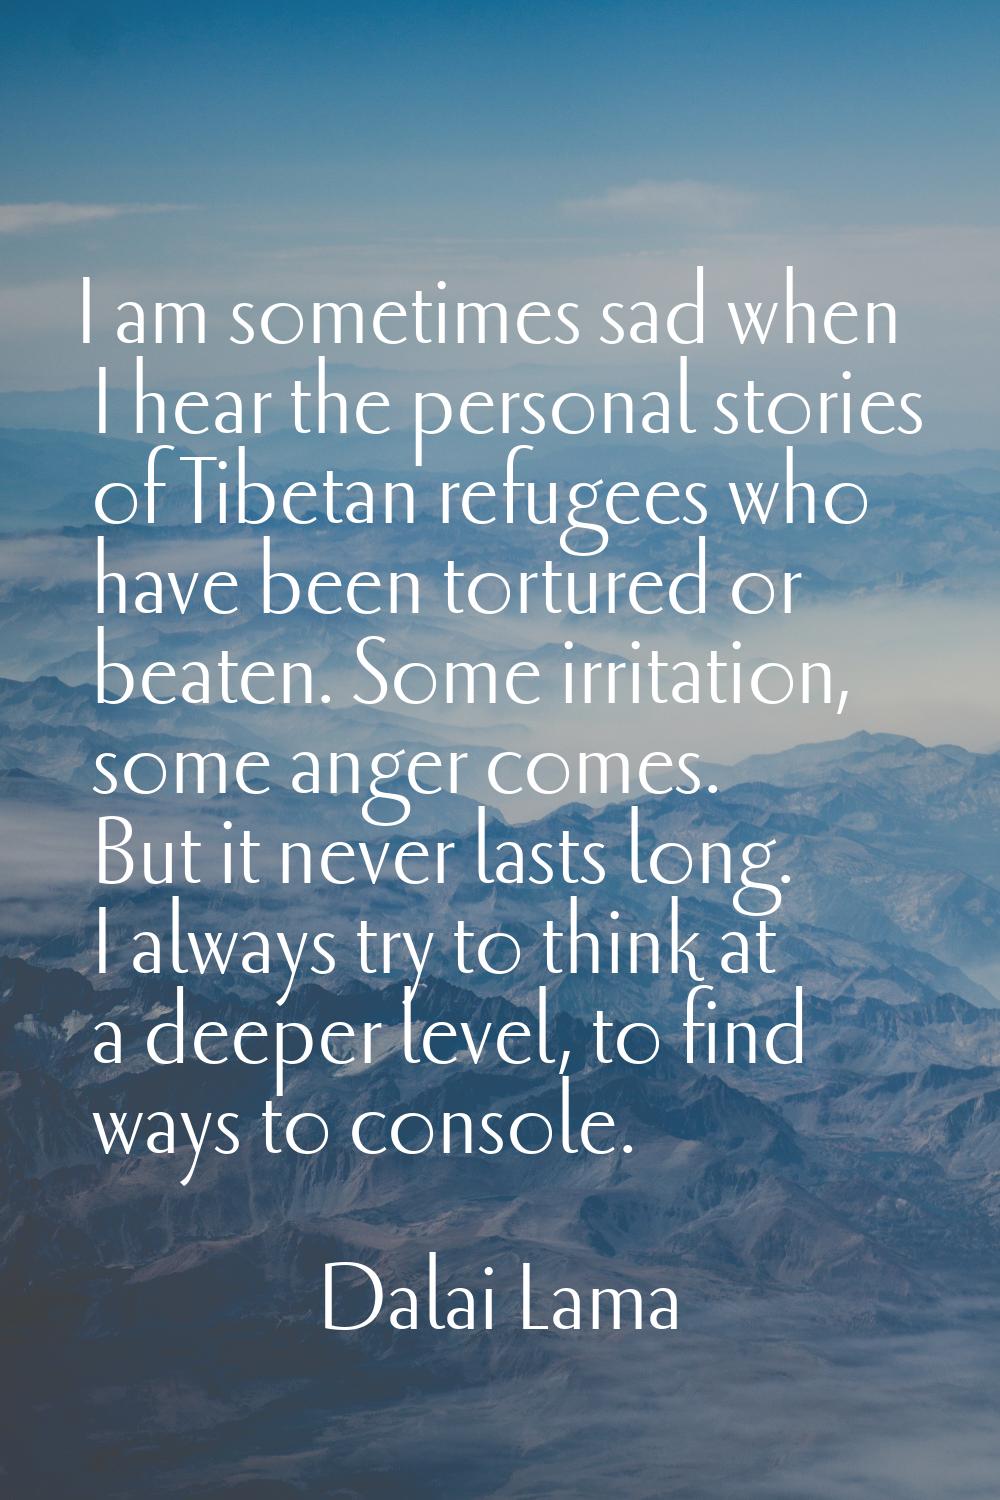 I am sometimes sad when I hear the personal stories of Tibetan refugees who have been tortured or b